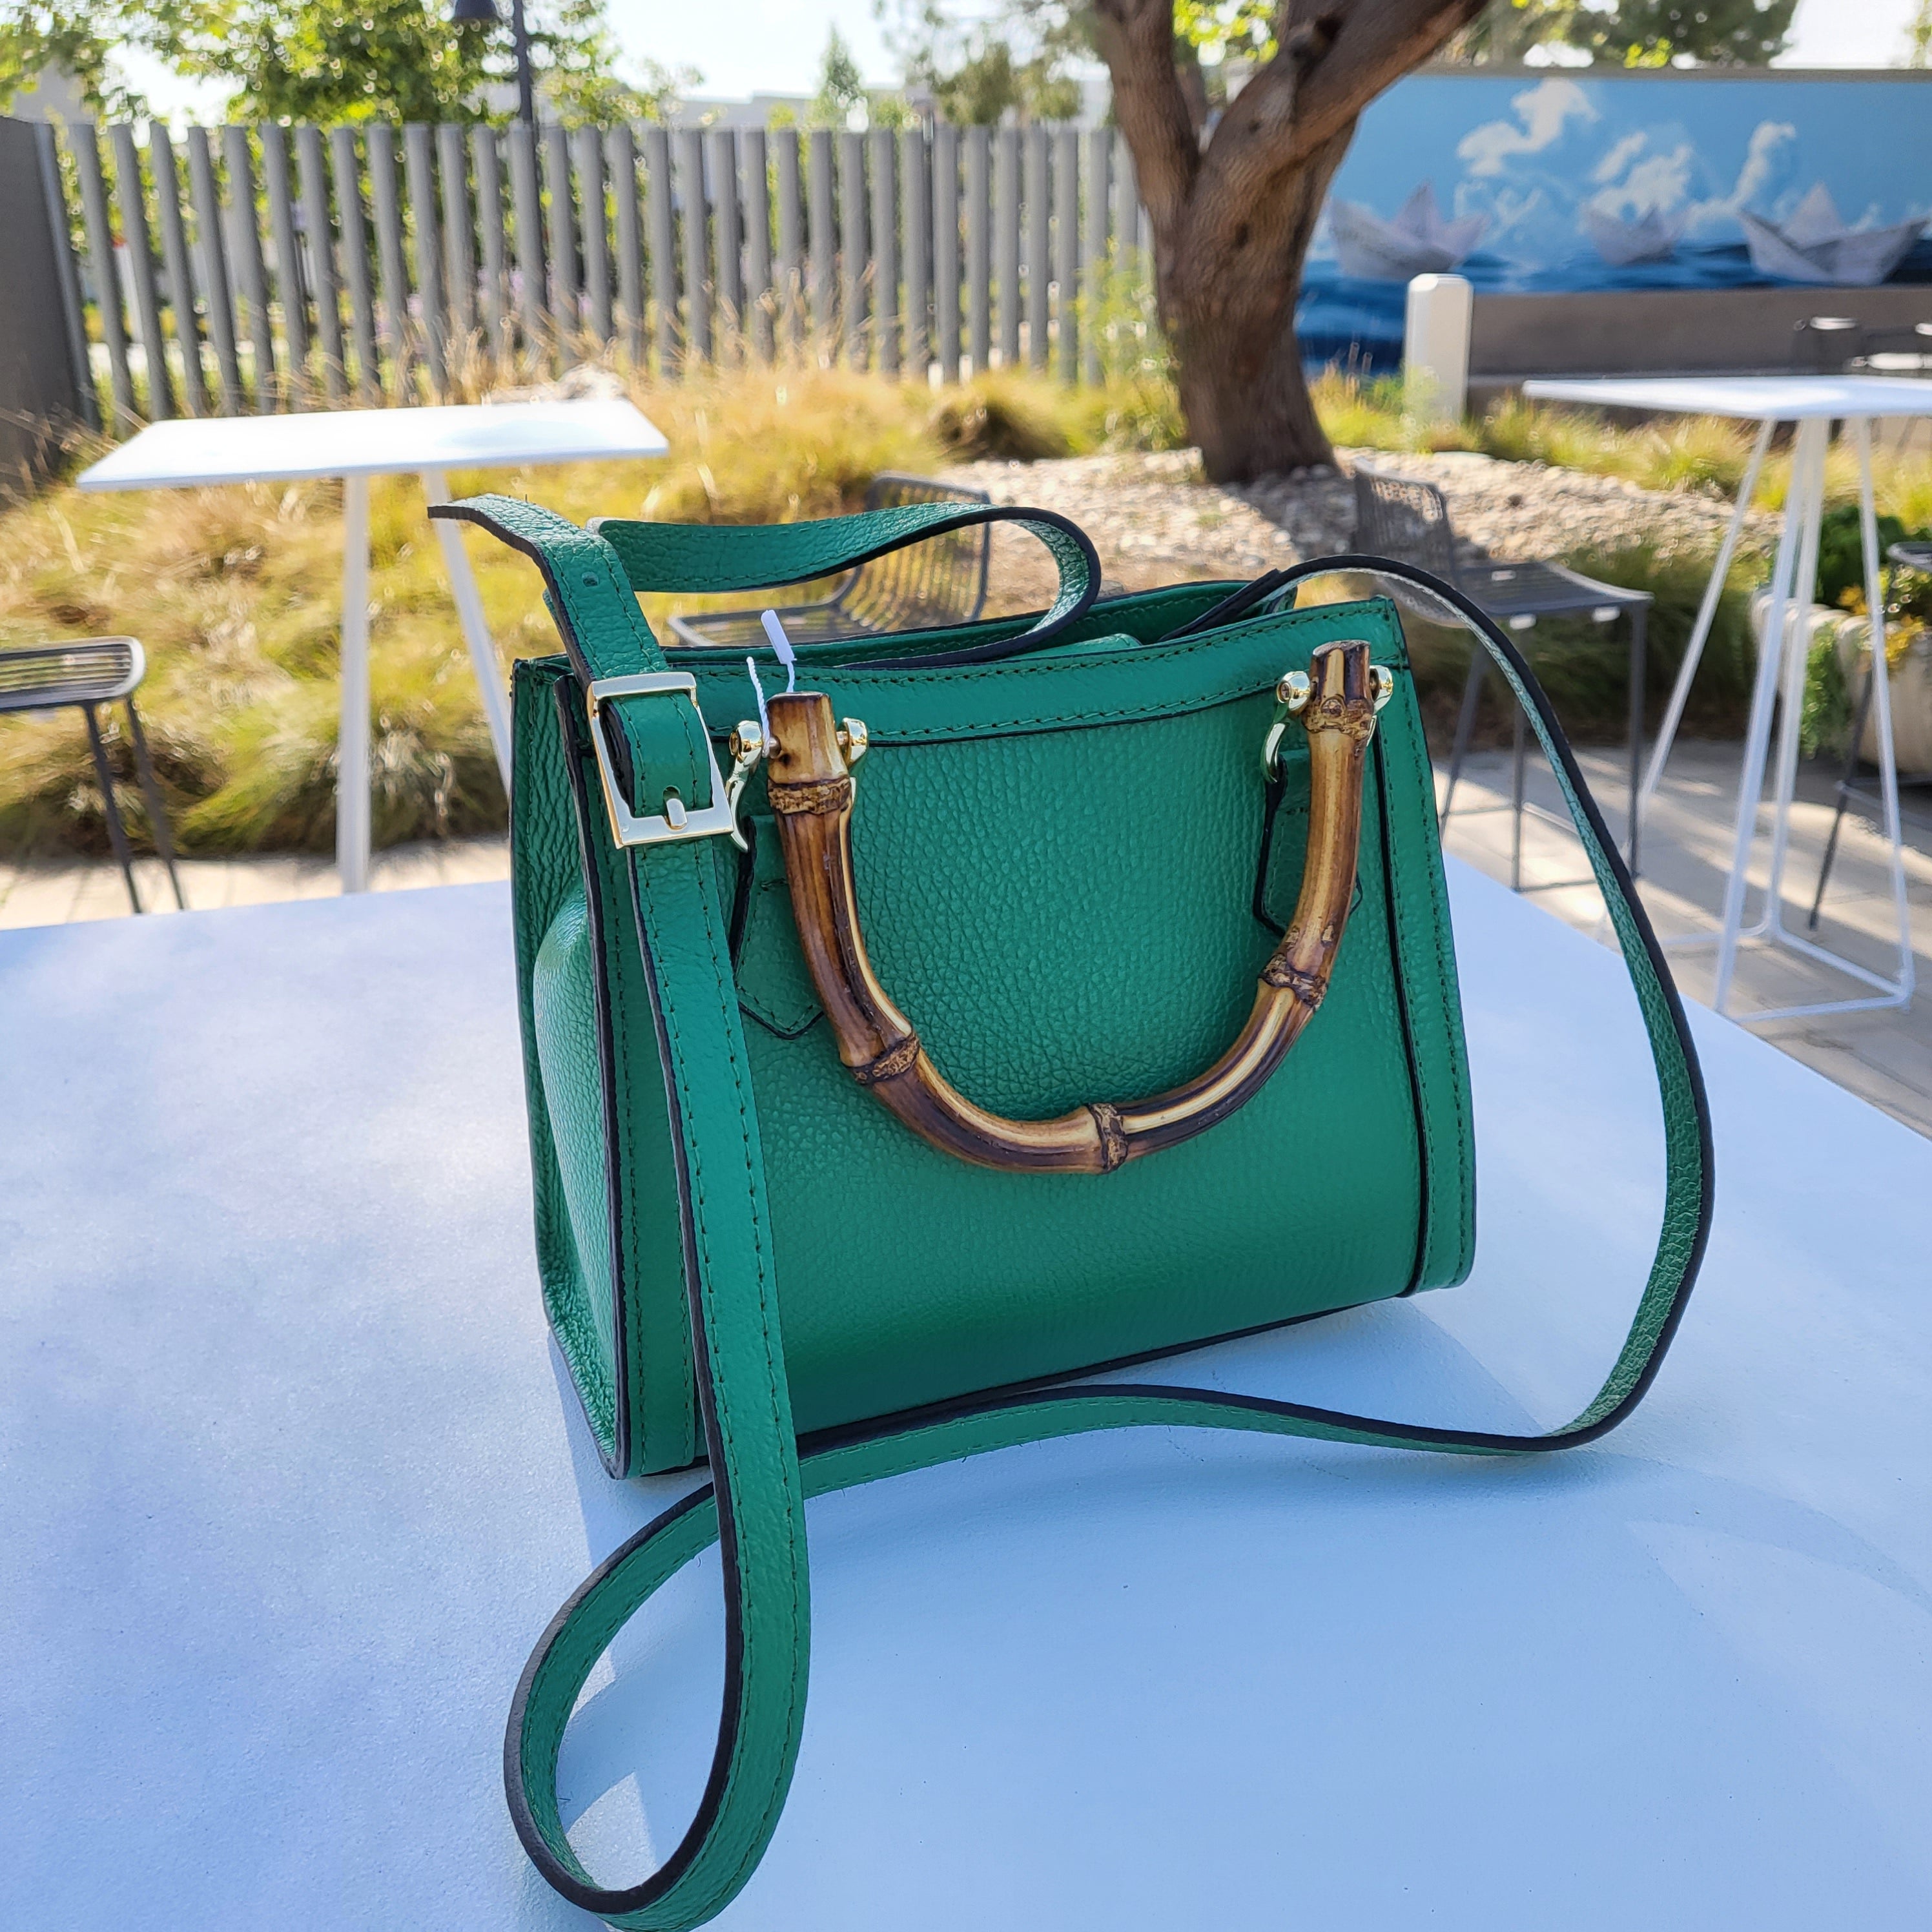 Coach Outlet Tote 38 In Colorblock in Green